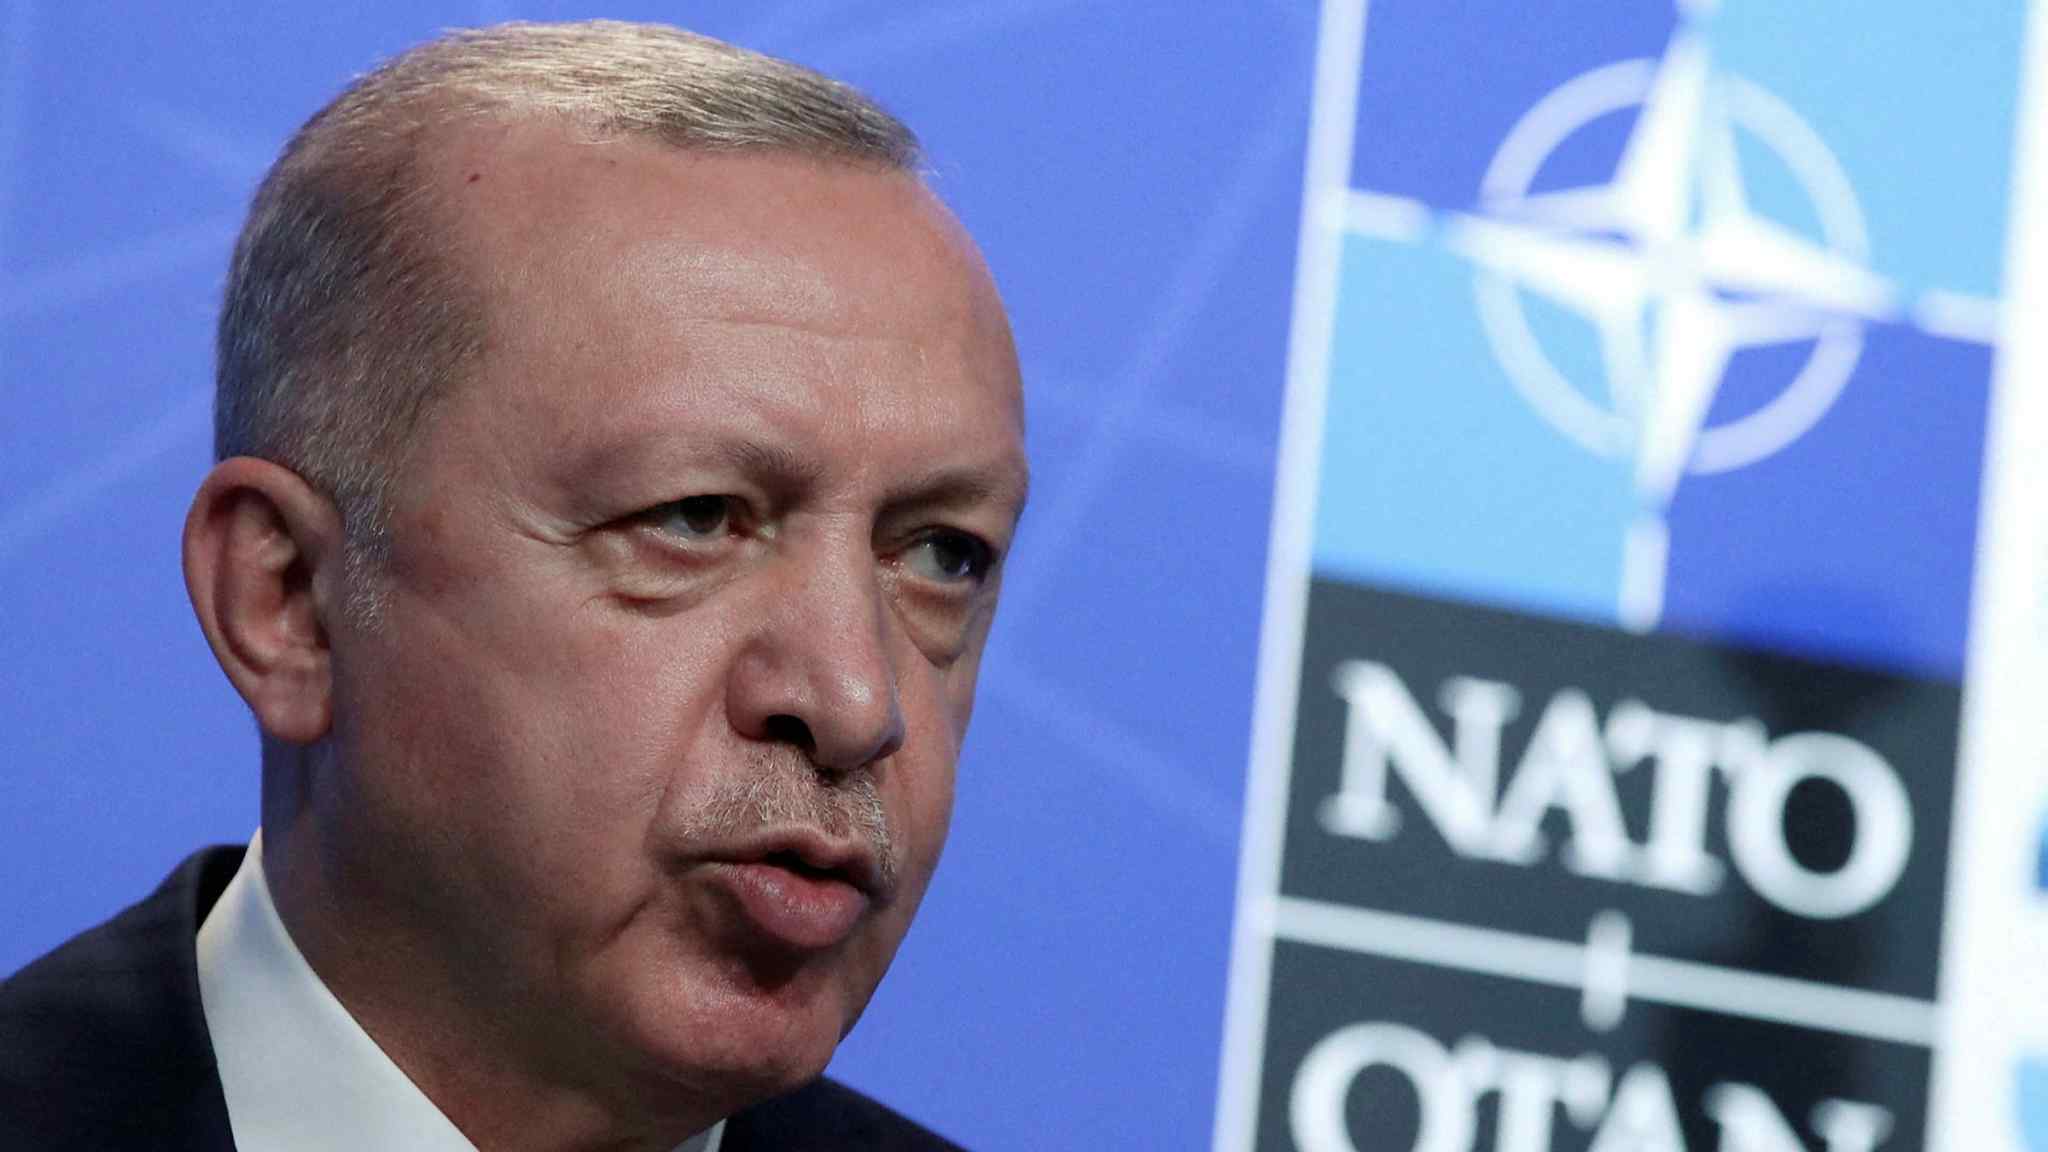 Why Erdoğan is picking a fight over Nato enlargement